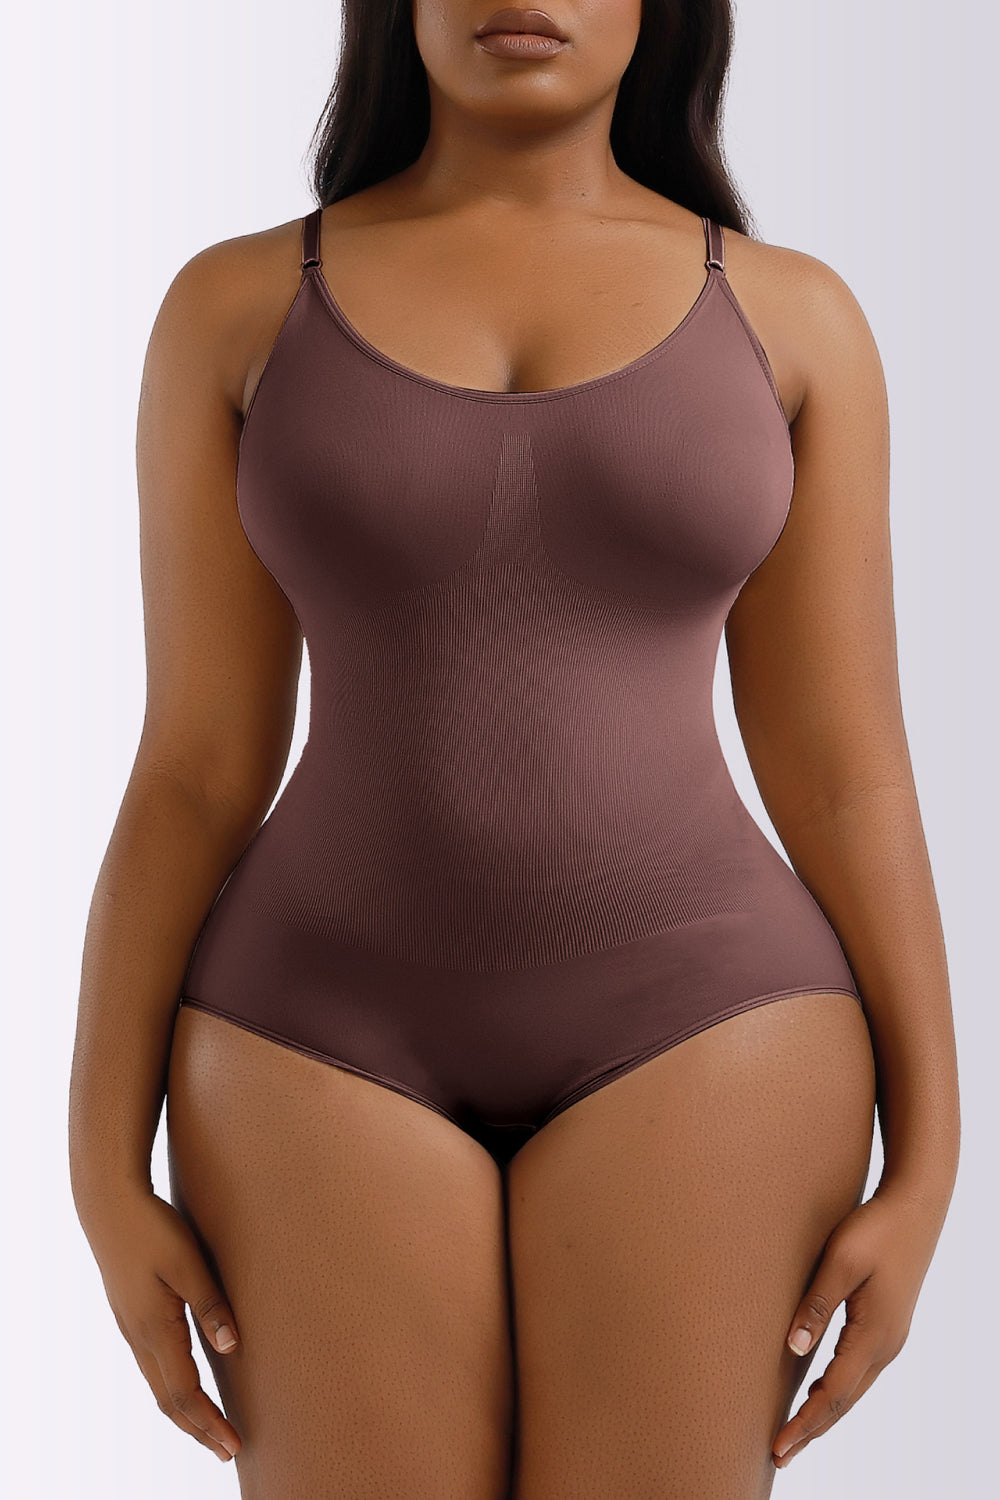 Spaghetti Strap Shaping Bodysuit - body shaper - Wild Willows Boutique - Massapequa, NY, affordable and fashionable clothing for women of all ages. Bottoms, tops, dresses, intimates, outerwear, sweater, shoes, accessories, jewelry, active wear, and more // Wild Willow Boutique.